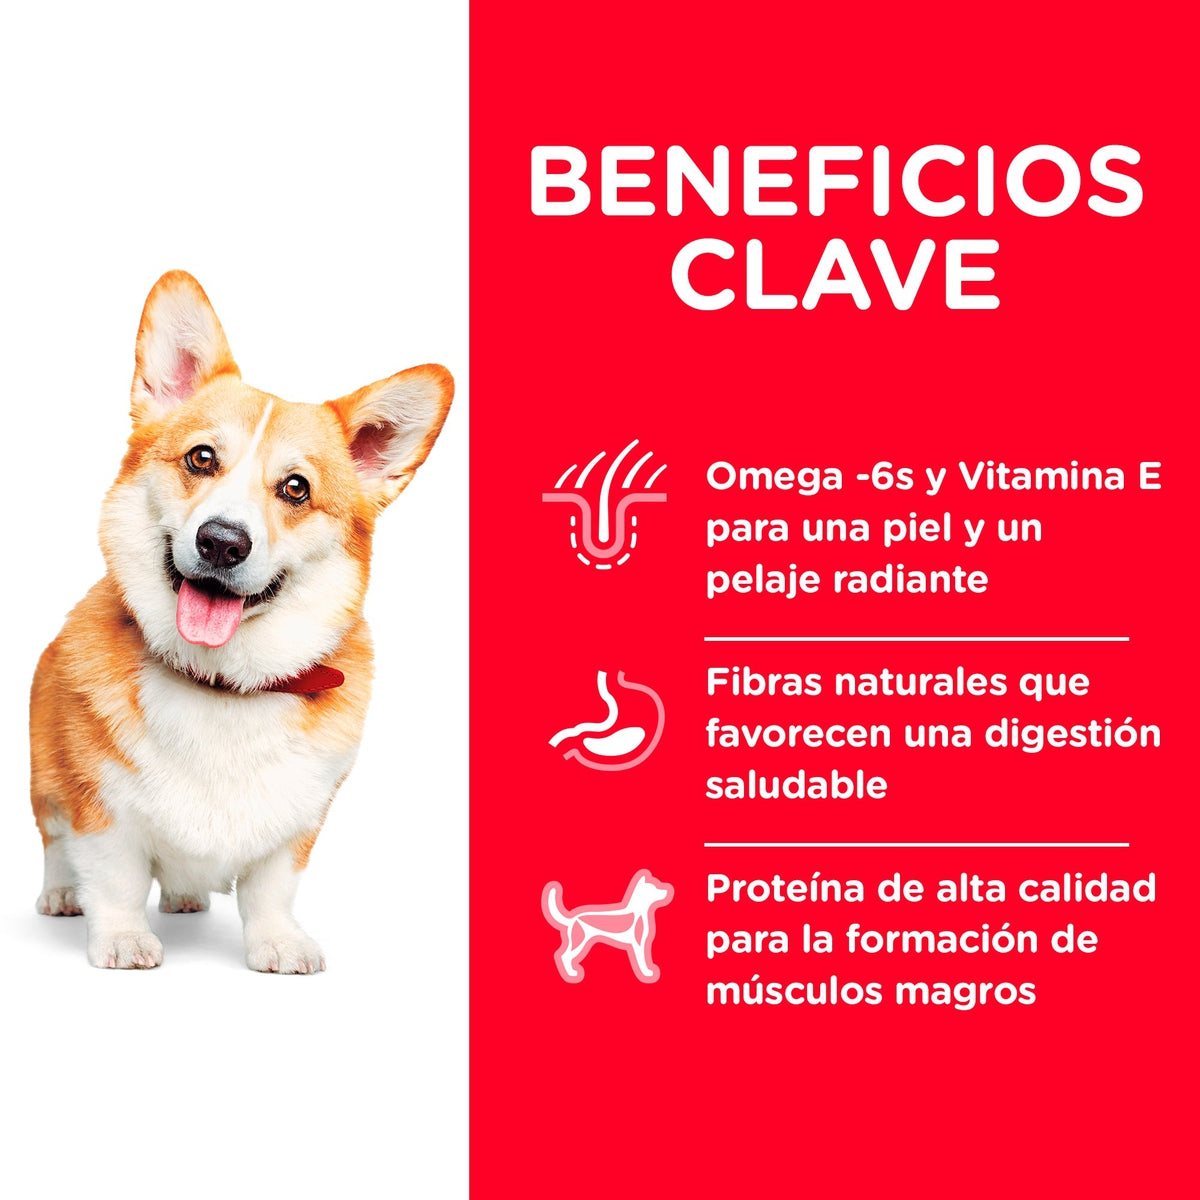 Alimento para Perro Hill's Science Diet Adult Advanced Fitness Small Bites